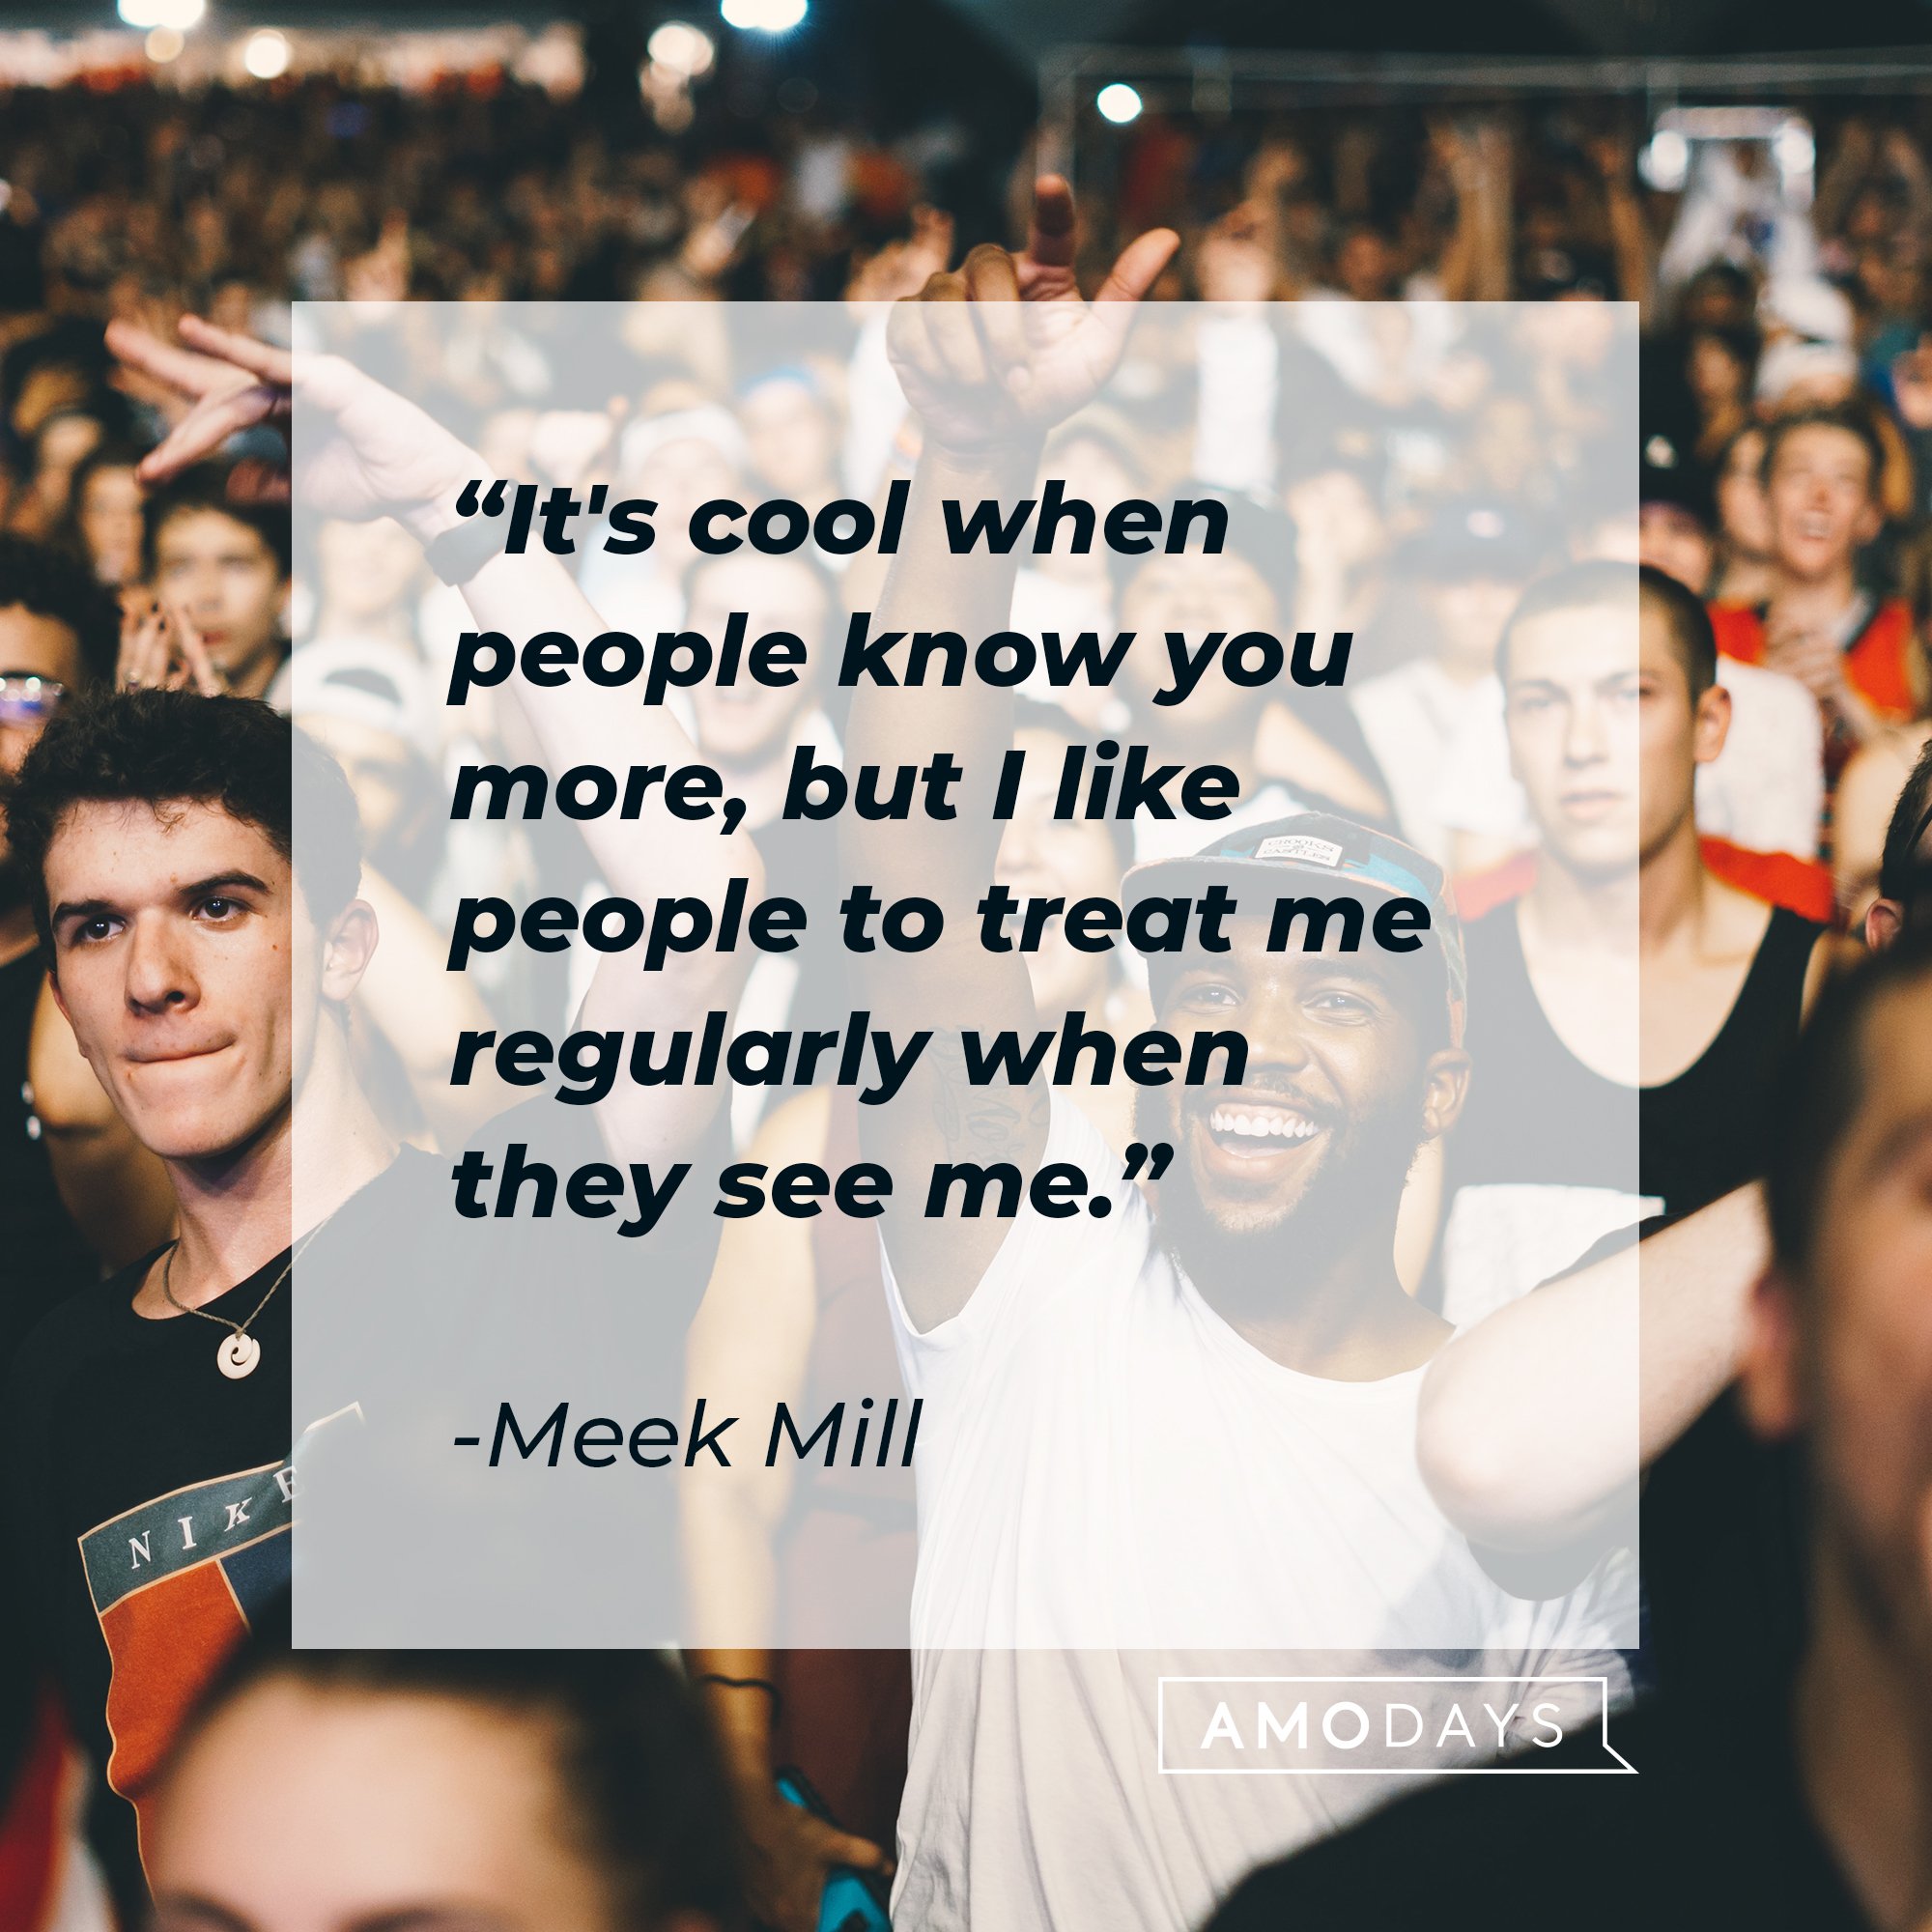  Meek Mill’s quote: "It's cool when people know you more, but I like people to treat me regularly when they see me." | Image: AmoDay